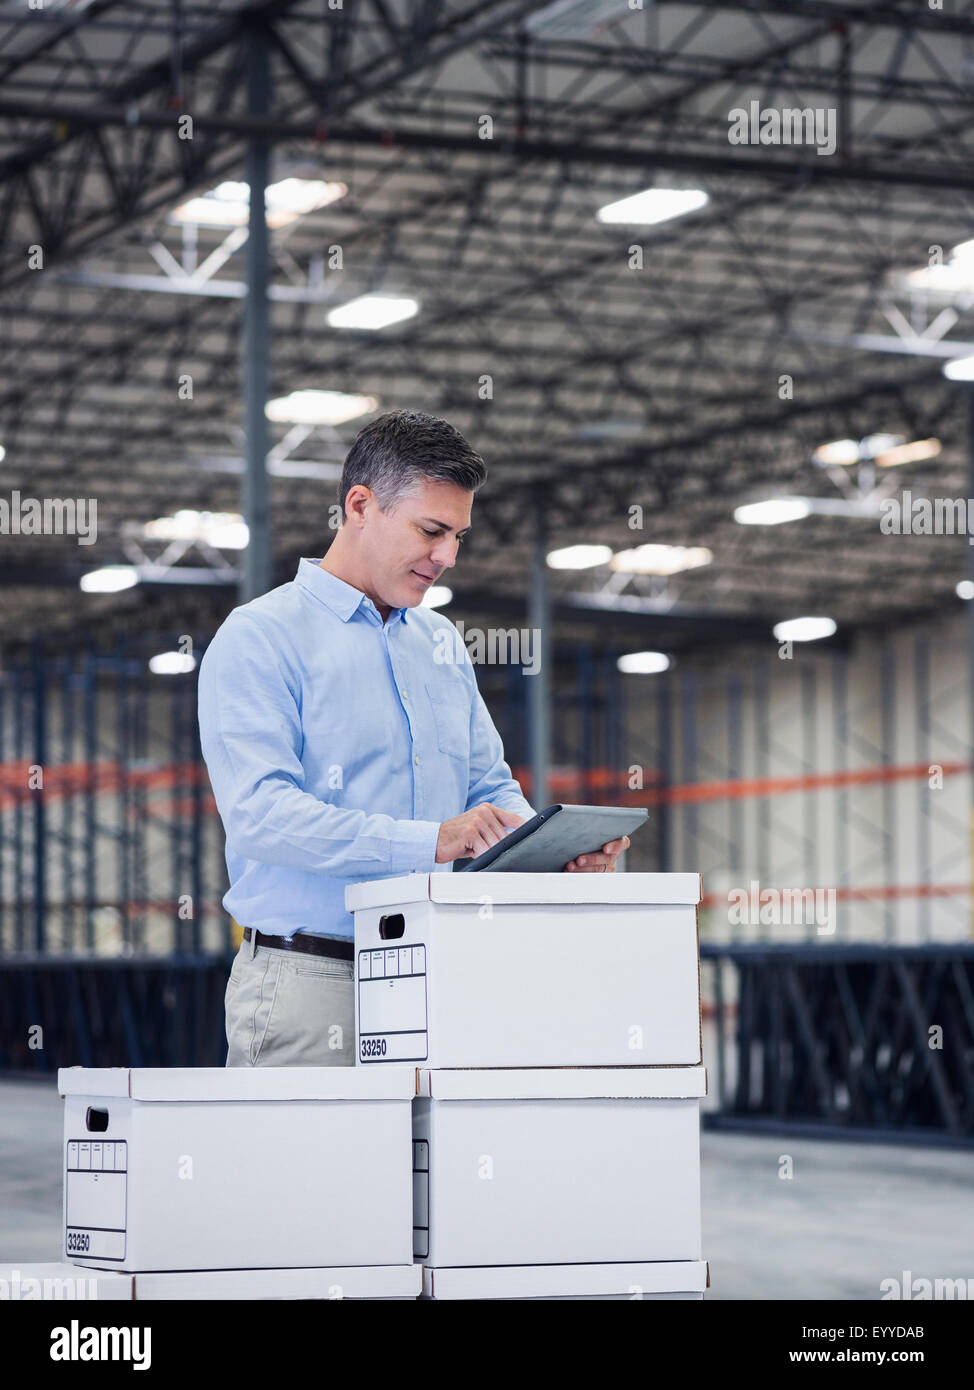 Caucasian businessman using digital tablet in empty warehouse Banque D'Images